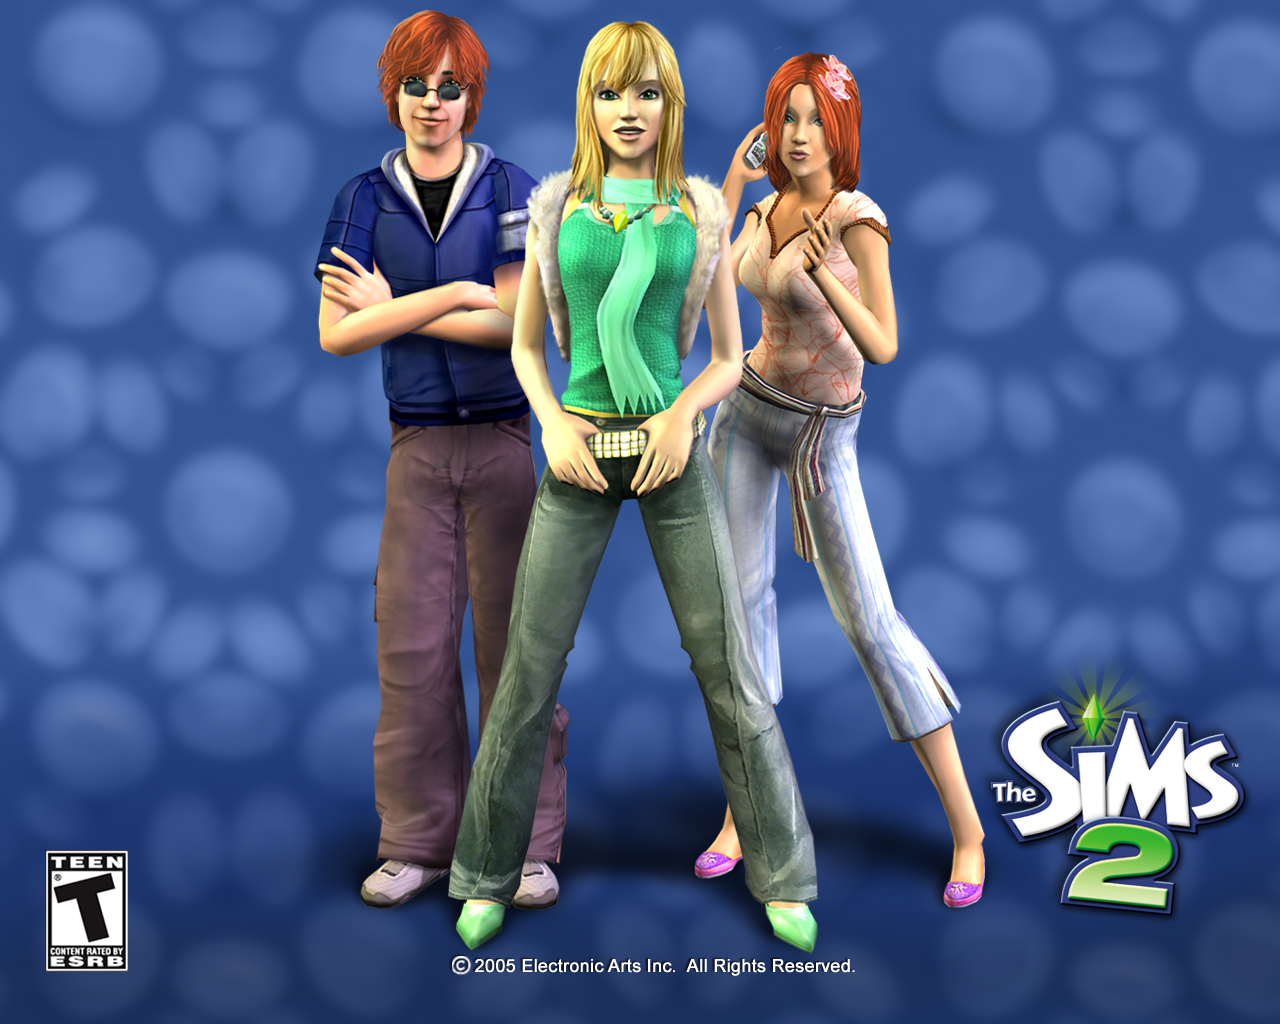 The Sims 2 - The Sims 2 Wallpaper (729273) - Fanpop